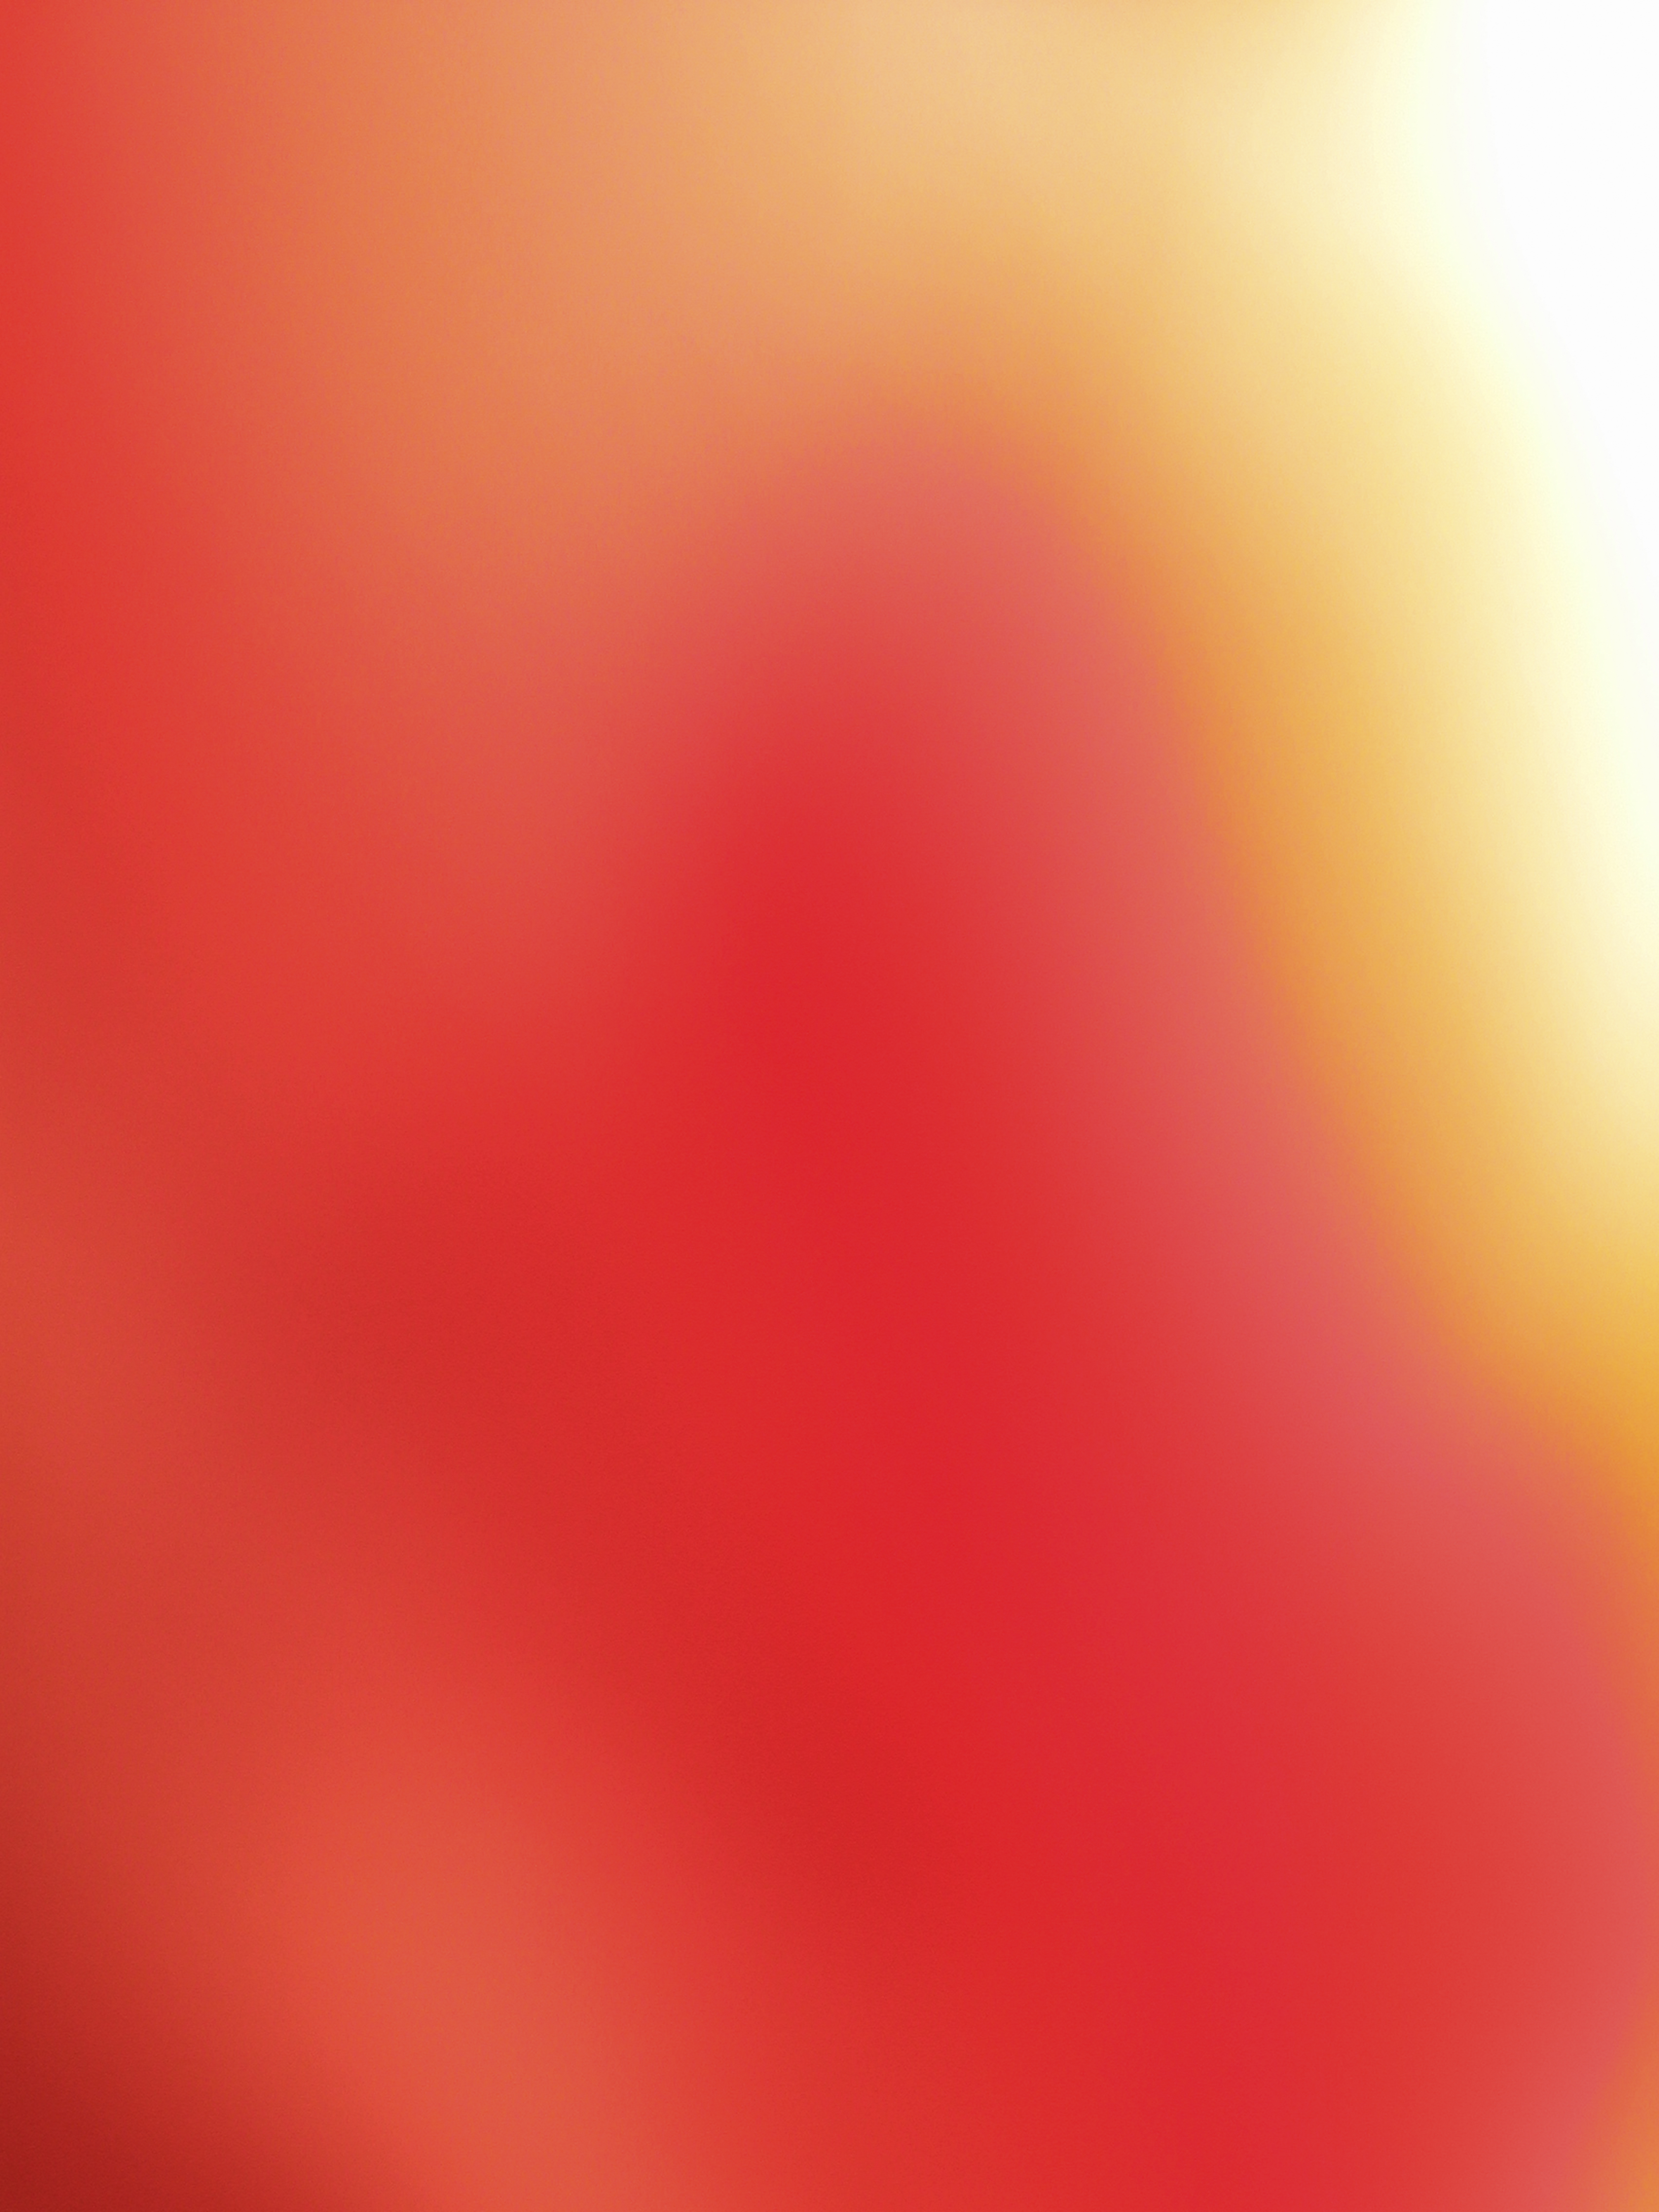 156045 Screensavers and Wallpapers Gradient for phone. Download gradient, abstract, yellow, red pictures for free